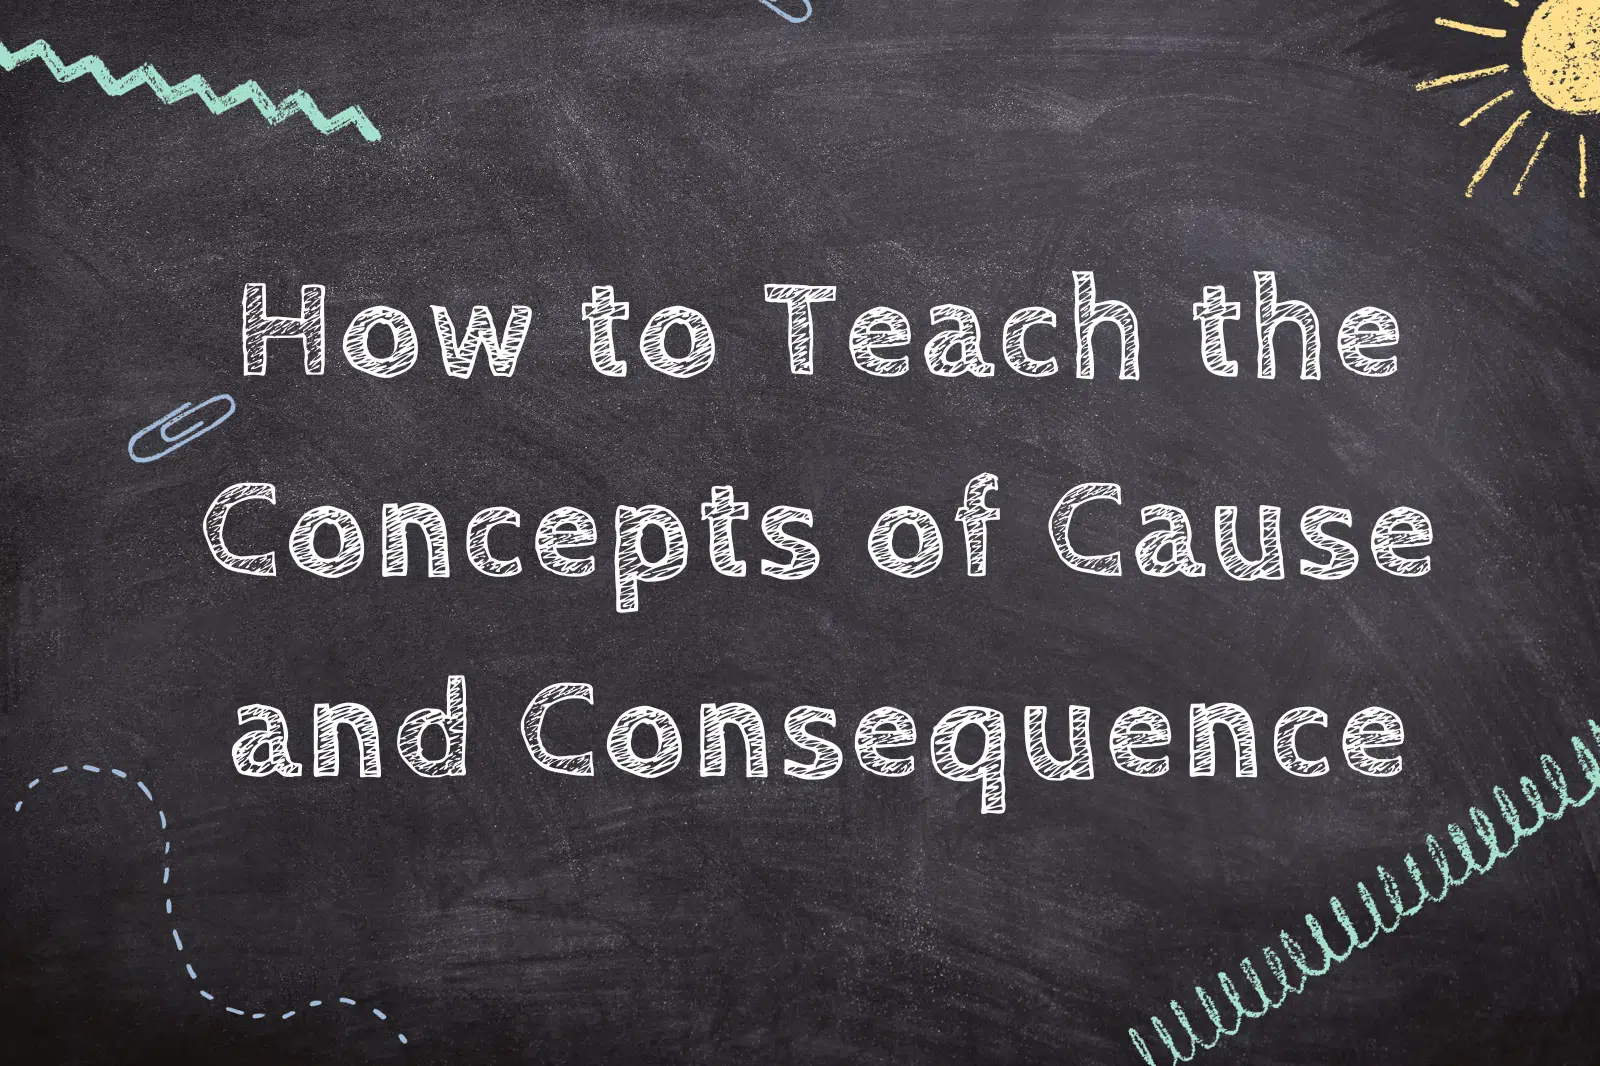 How to Teach the Concepts of Cause and Consequence